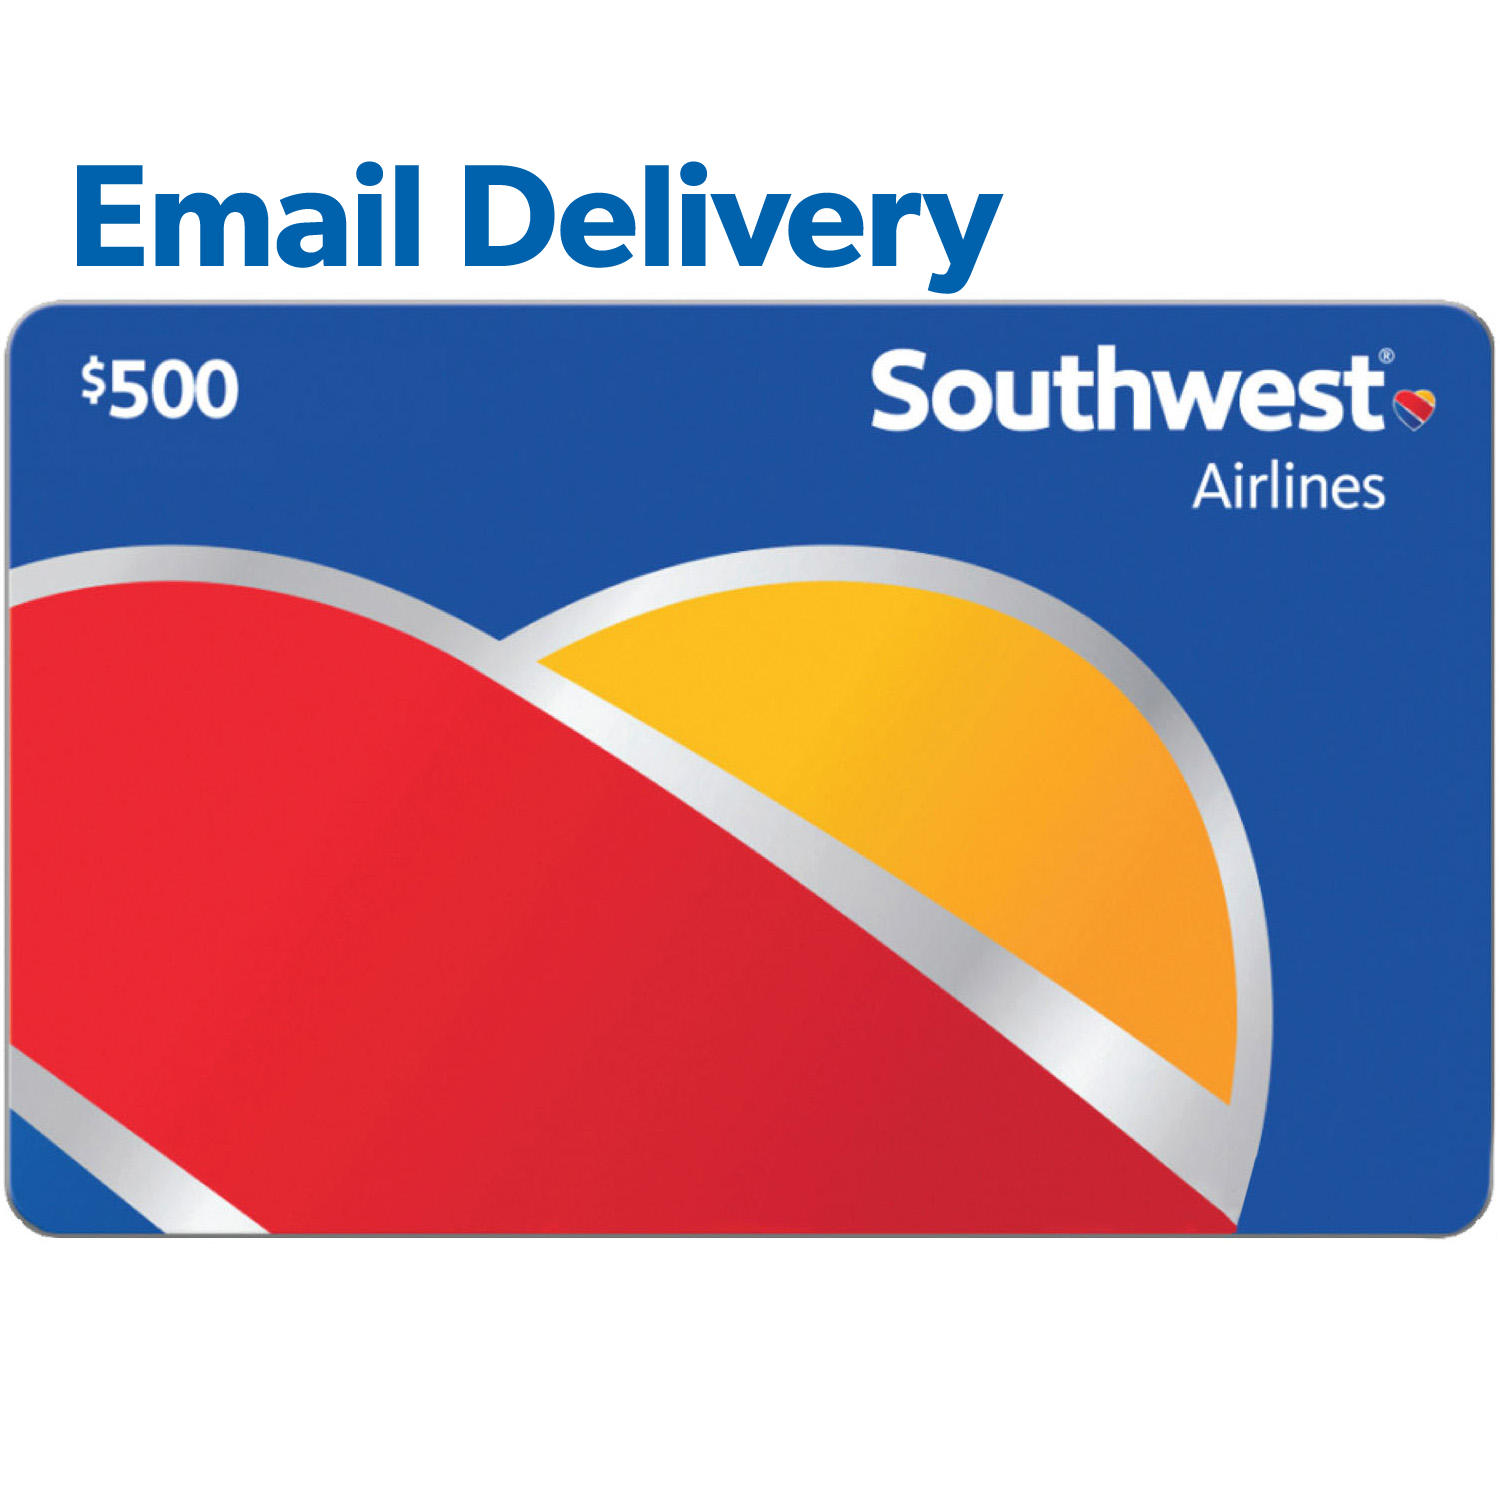 Southwest Airlines $500 Email Delivery Gift Card - Sam's Club